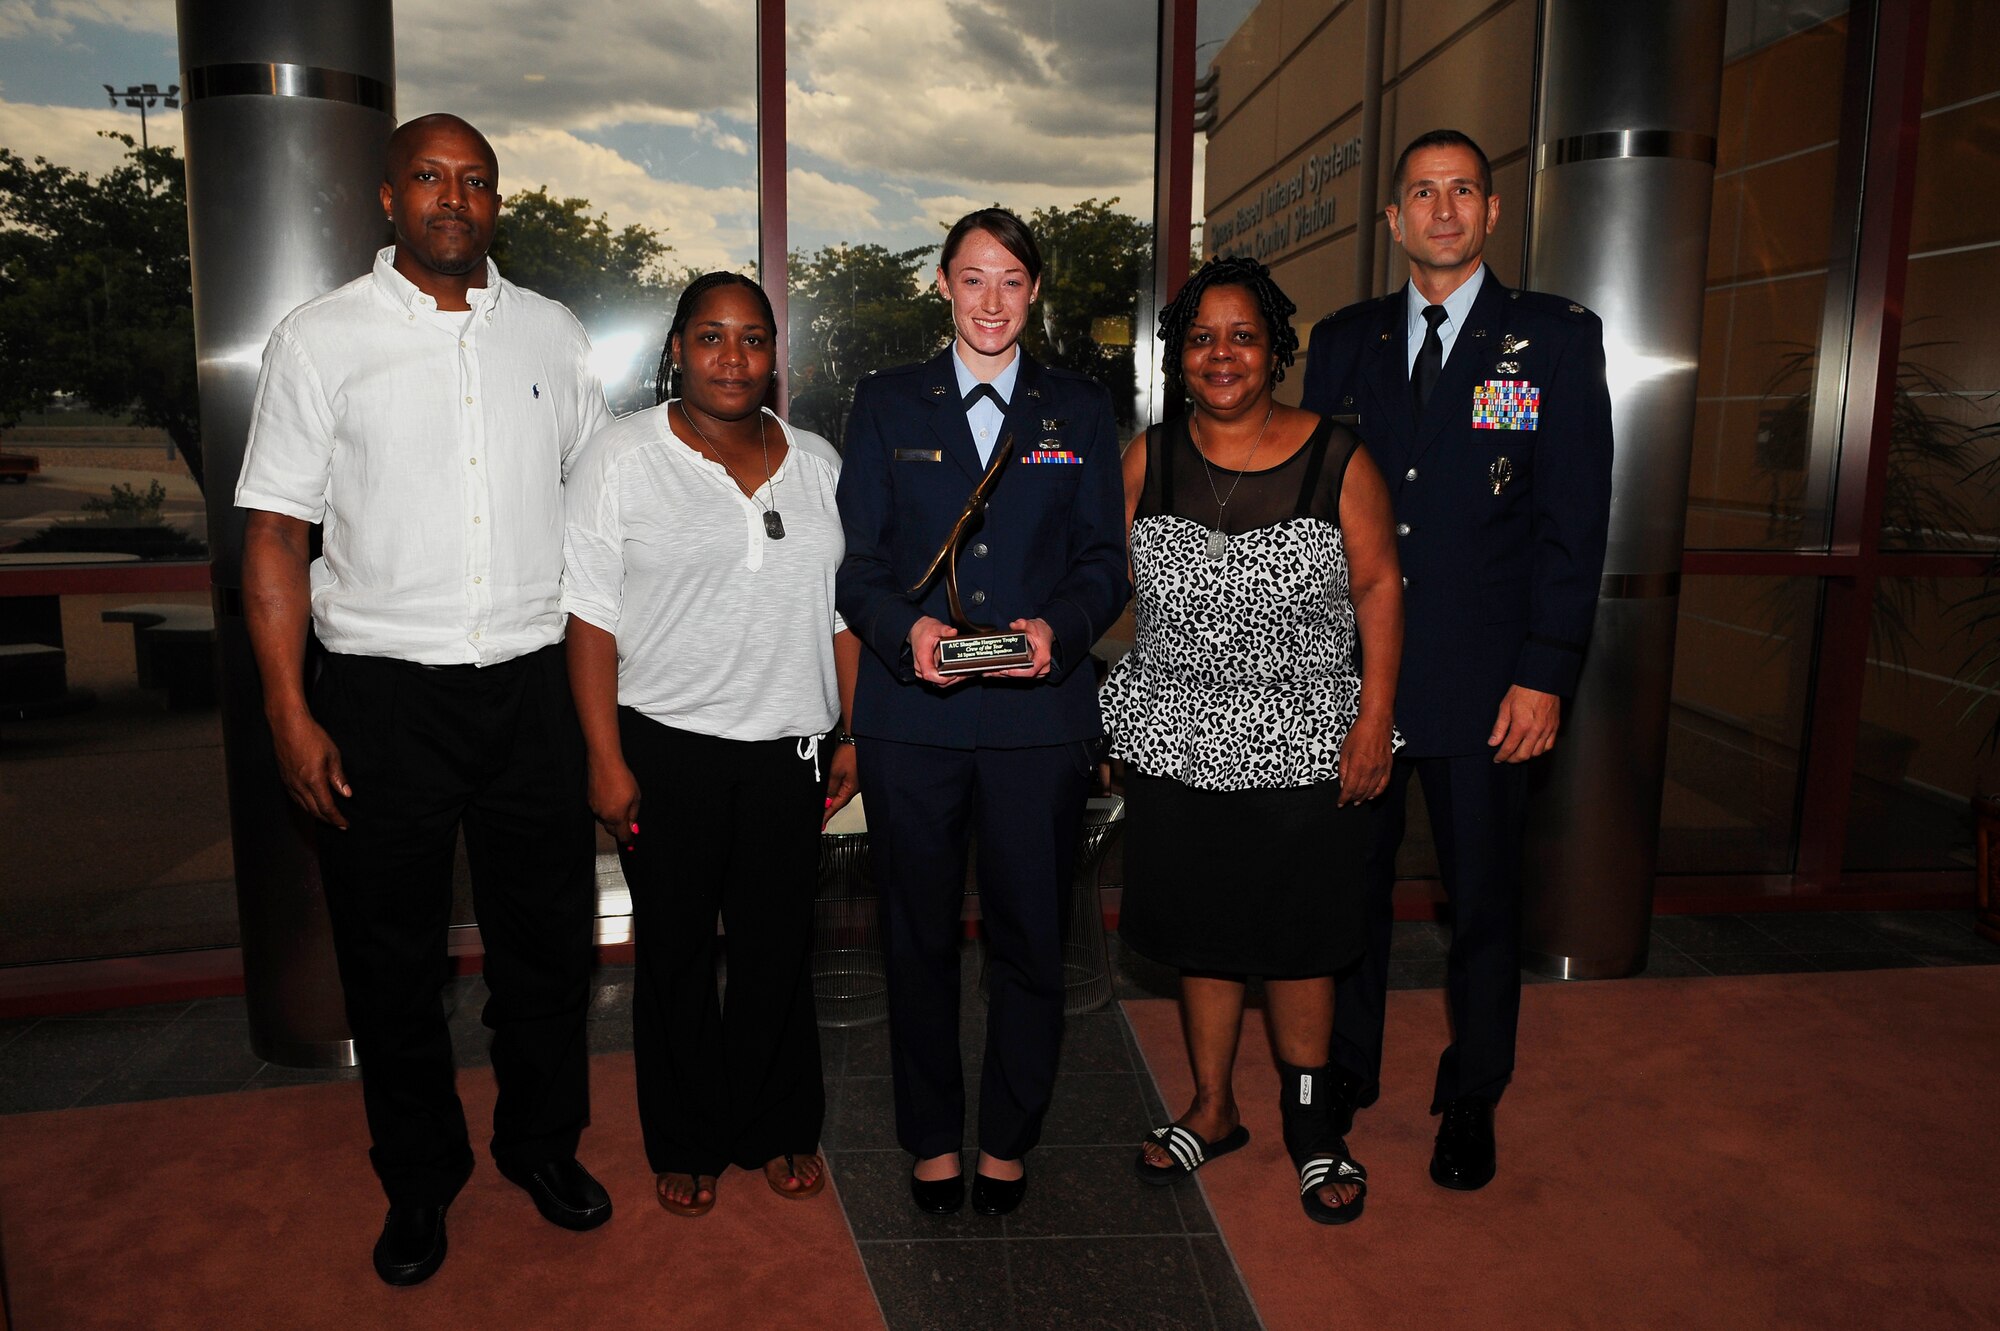 1st Lt. Laura Henderson, 2nd Space Warning Squadron Delta Crew commander, center, received the A1C Shaquille Hargrove Crew of the Year award from Hargrove’s parents, left, and grandmother, second from right, July 25, 2014, at the 460th Operations Group Mission Control Station on Buckley Air Force Base, Colo. This award was created to honor Hargrove, who was killed in an incident July 2013 in downtown Denver. The award is presented to the crew that demonstrates the highest level of excellence within the squadron. (U.S. Air Force photo by Senior Airman Phillip Houk/Released)